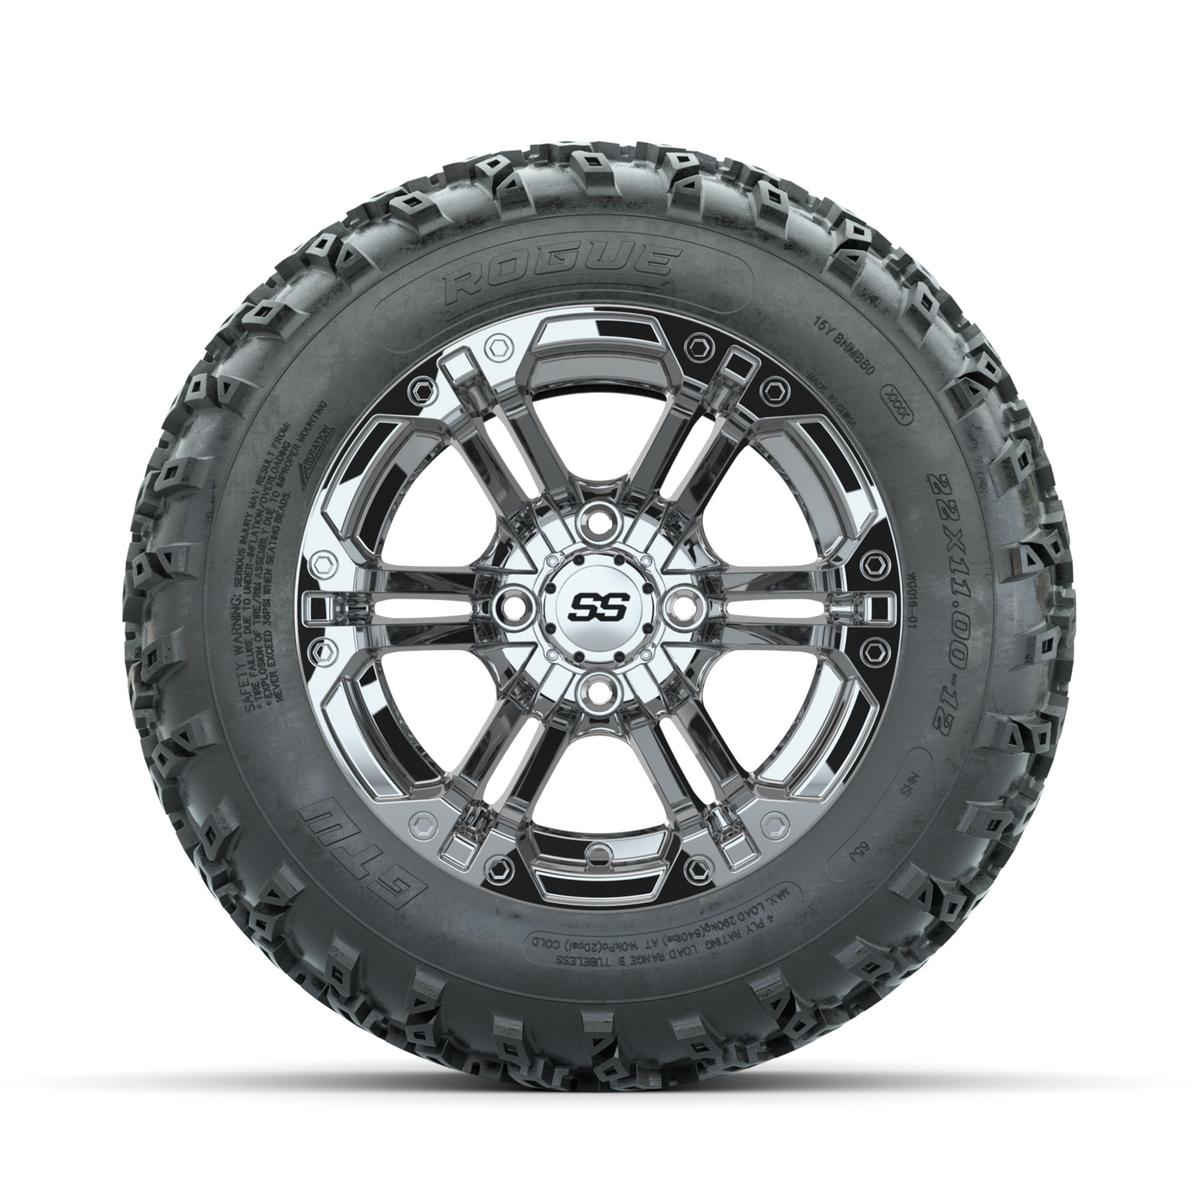 GTW Specter Chrome 12 in Wheels with 22x11.00-12 Rogue All Terrain Tires – Full Set